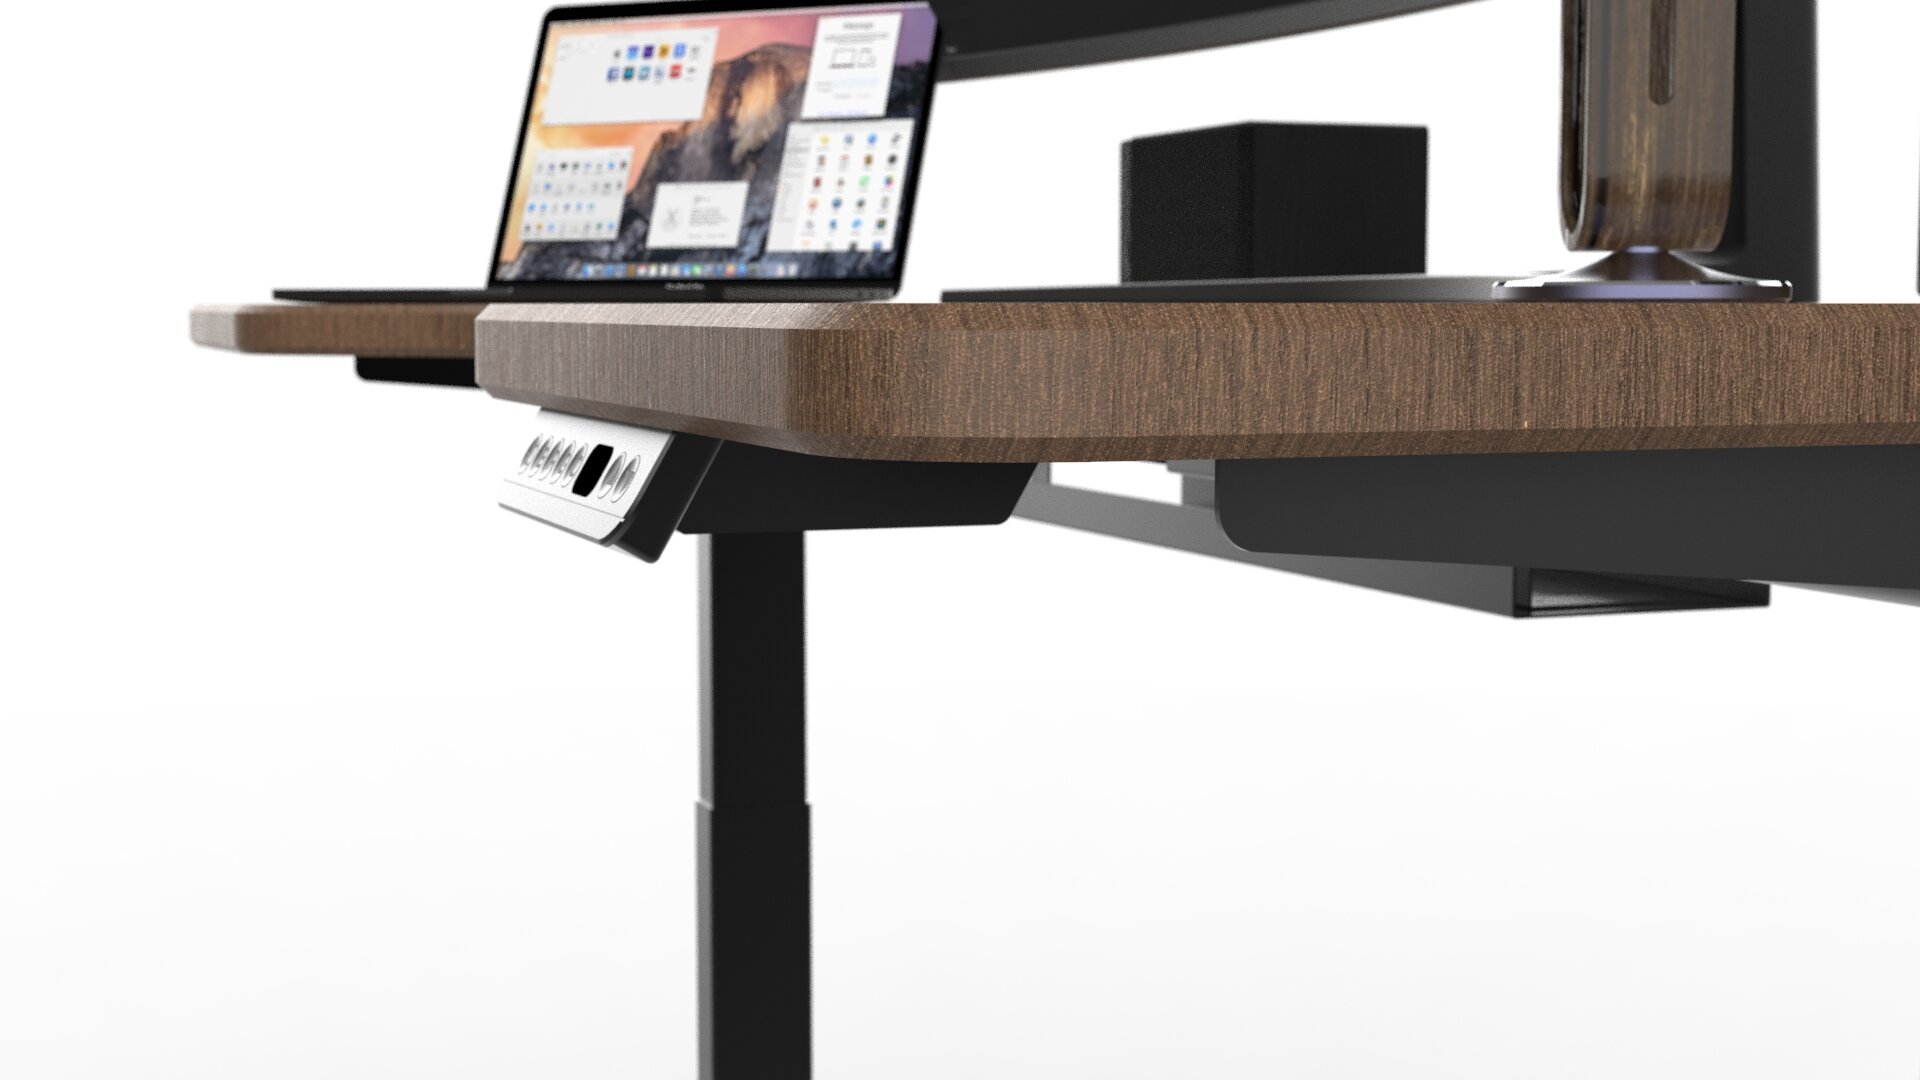 The smart and ergonomic desk that reduces back strain